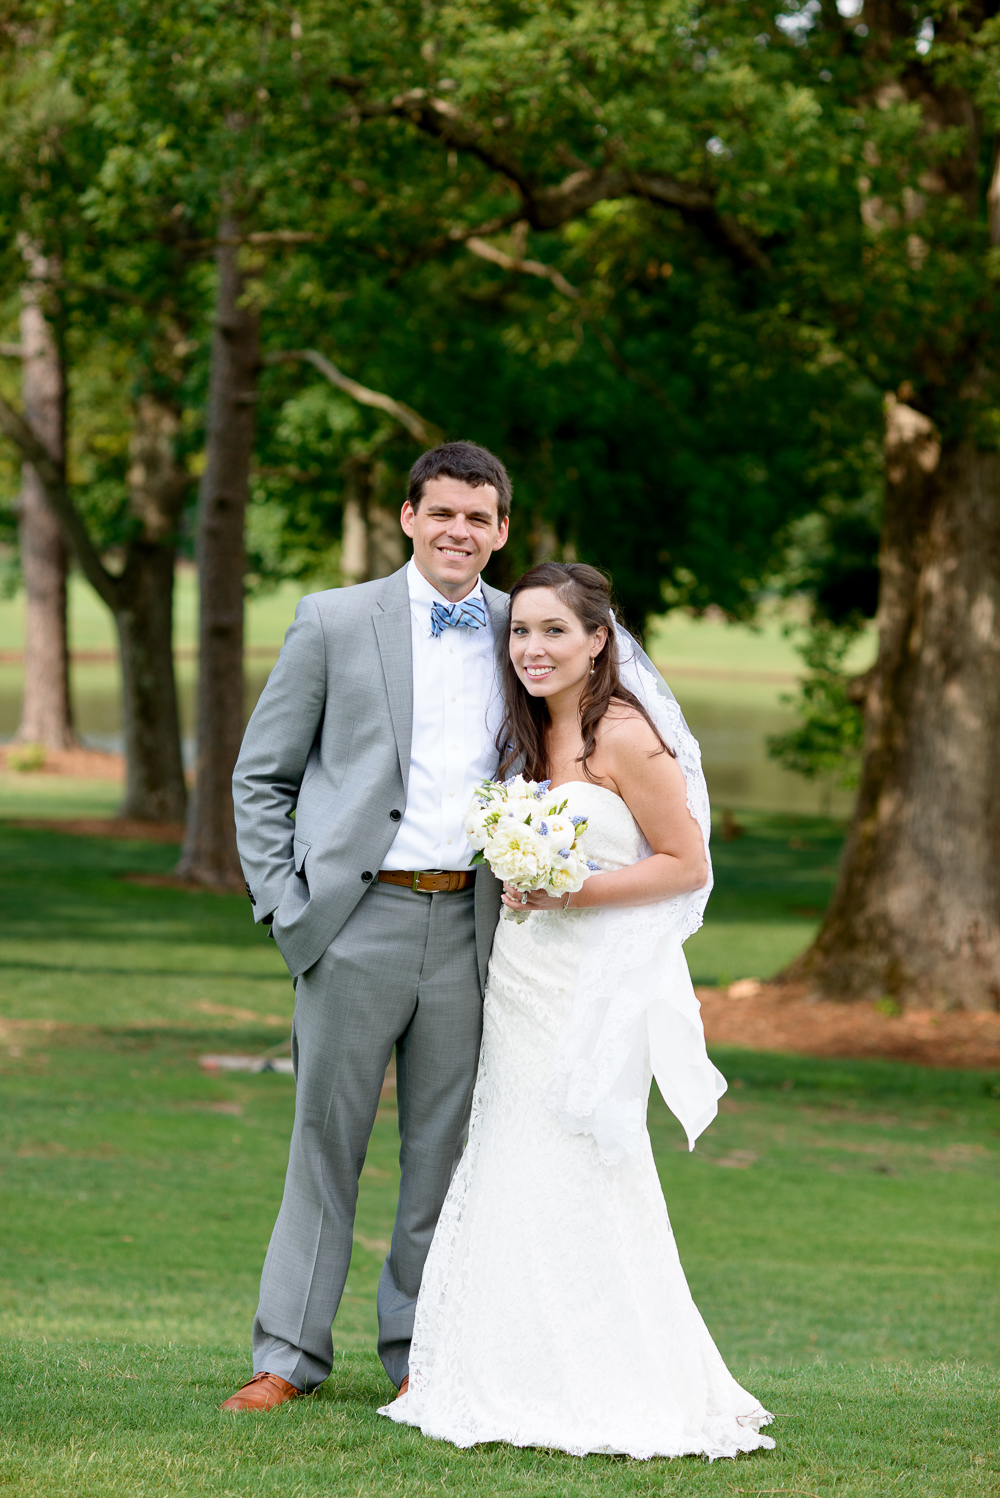 Wedding Reception at Athens Country Club in Athens, GA